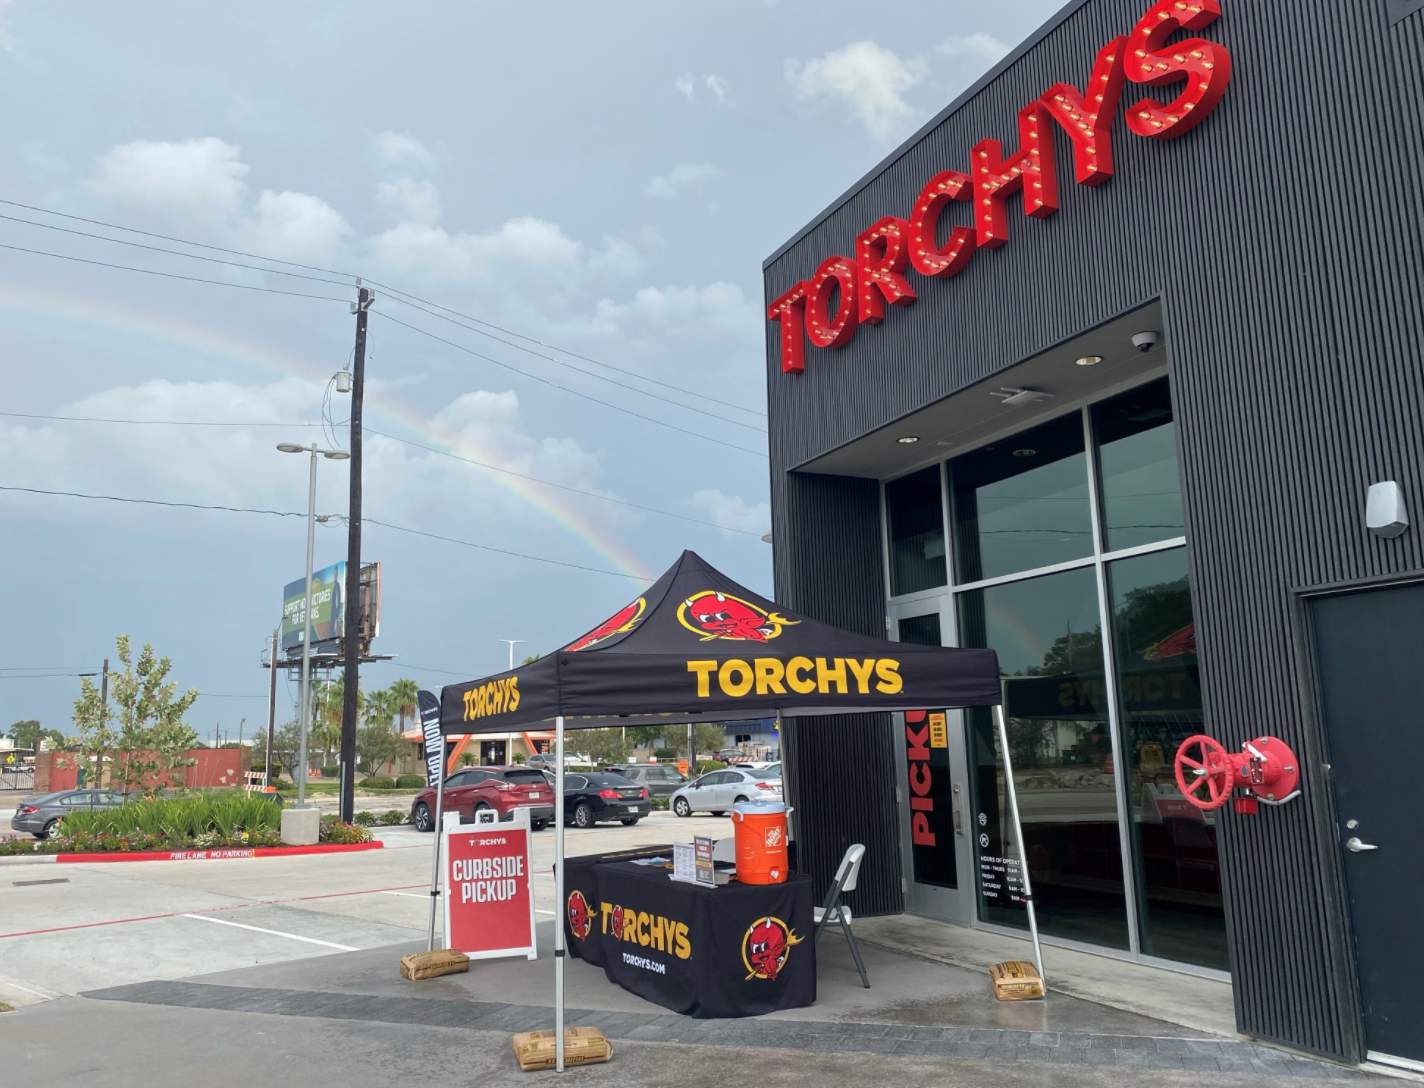 Torchy’s Taco opens new location in Memorial City